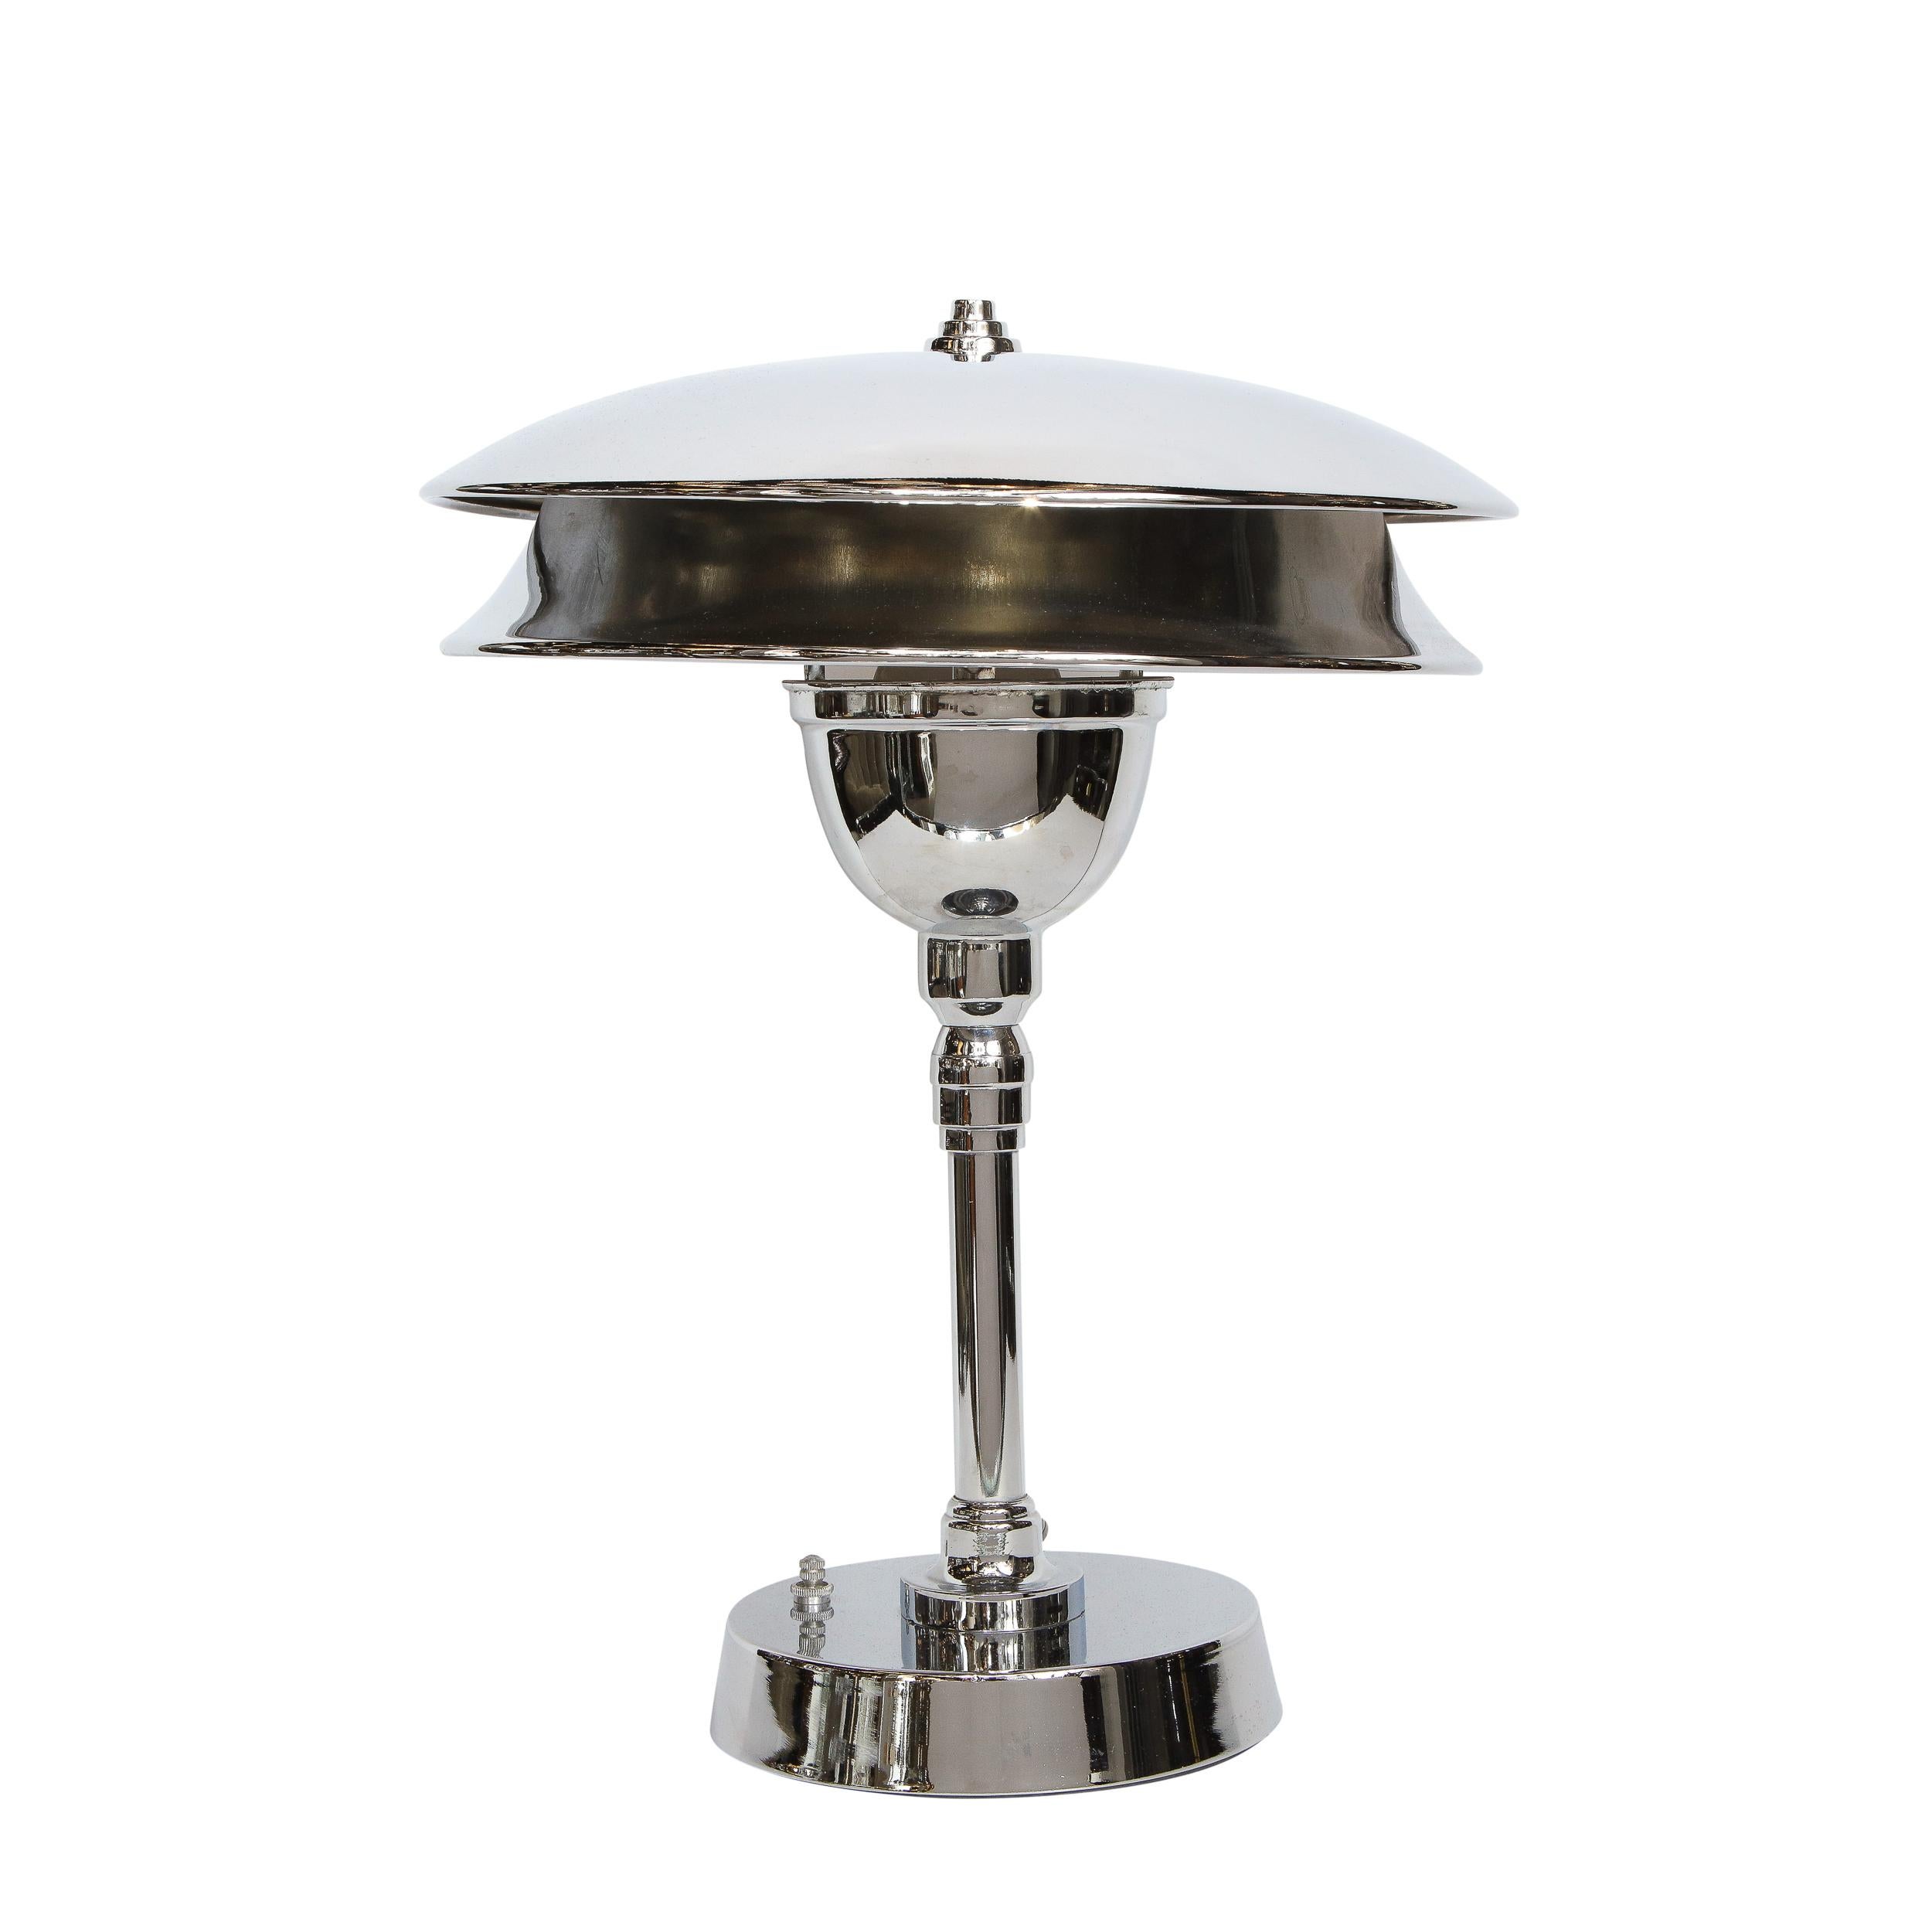 This refined Art Deco Machine Age table lamp was realized in the United States, circa 1935. It features a volumetric circular base skyscraper style base- a form that recurs in the finial atop the two tier concave shade. This skyscraper style